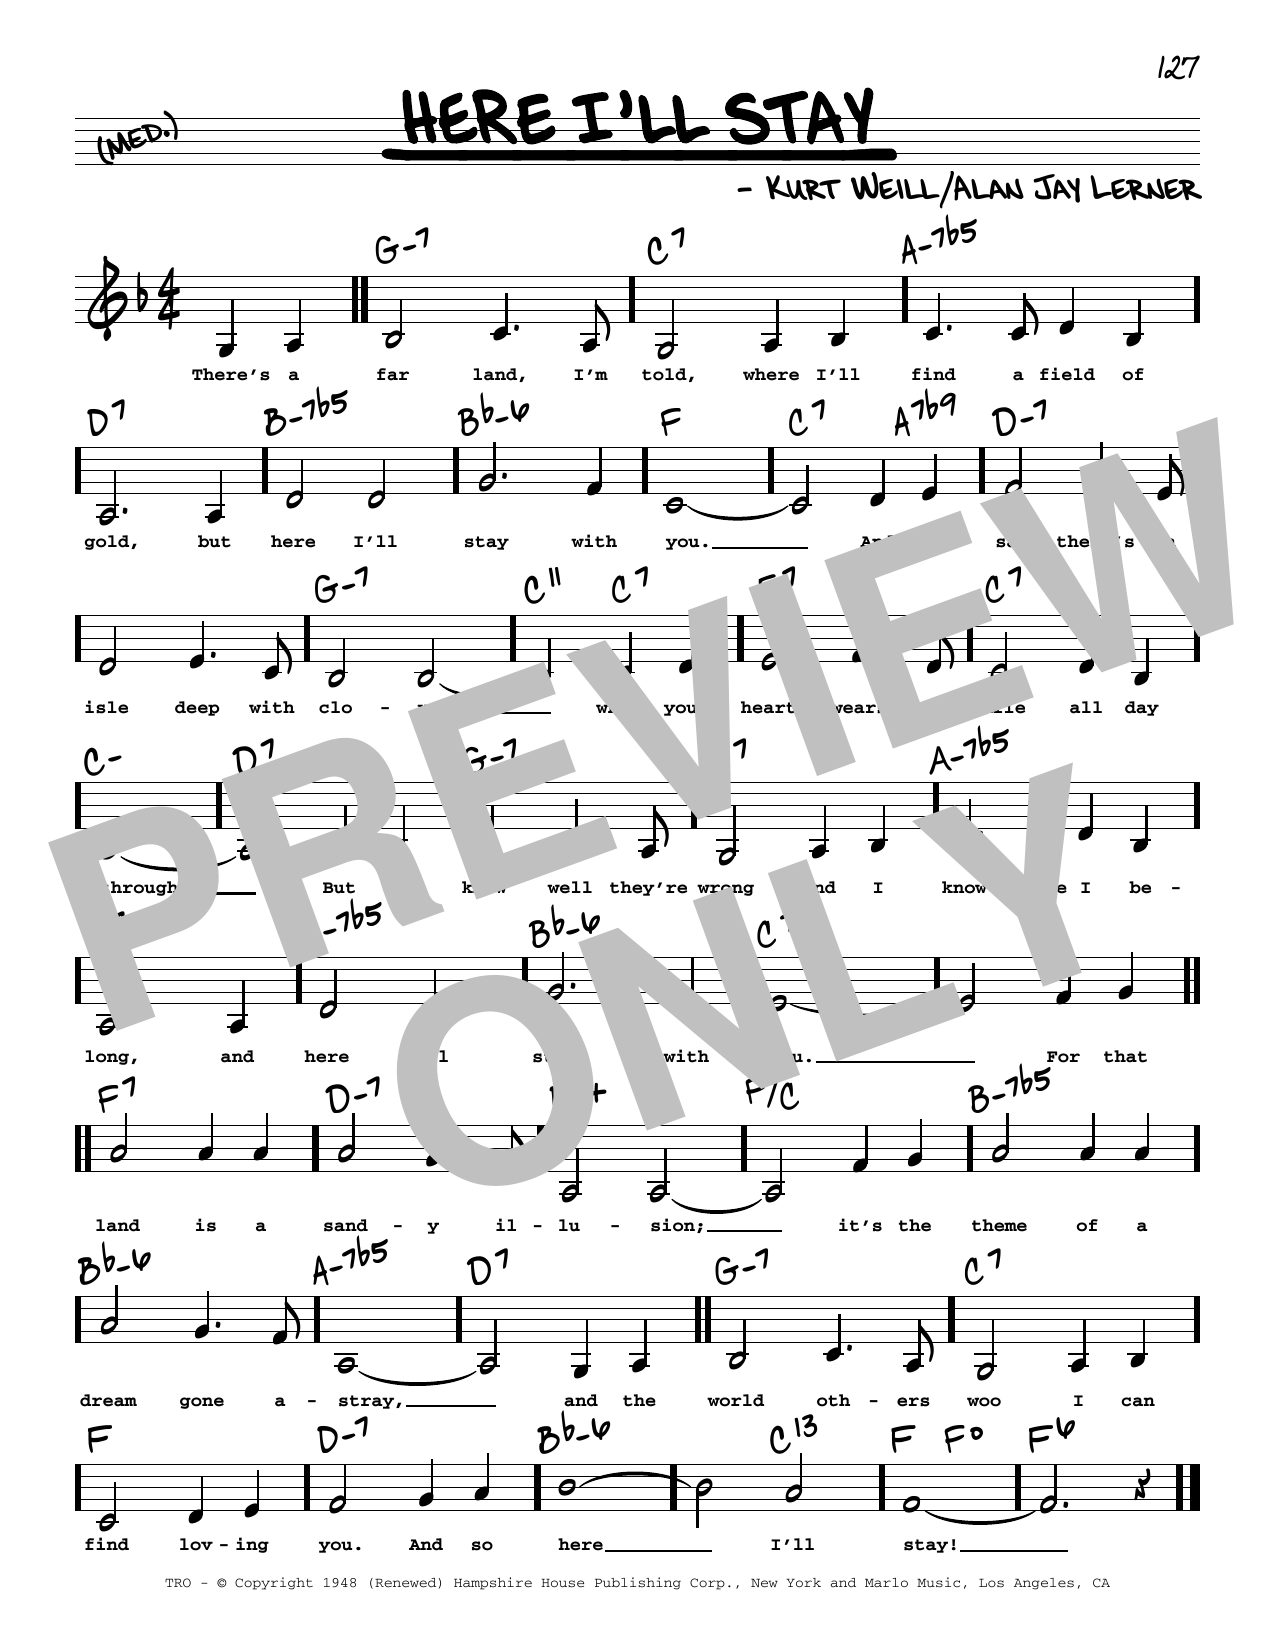 Alan Jay Lerner Here I'll Stay (Low Voice) sheet music notes printable PDF score